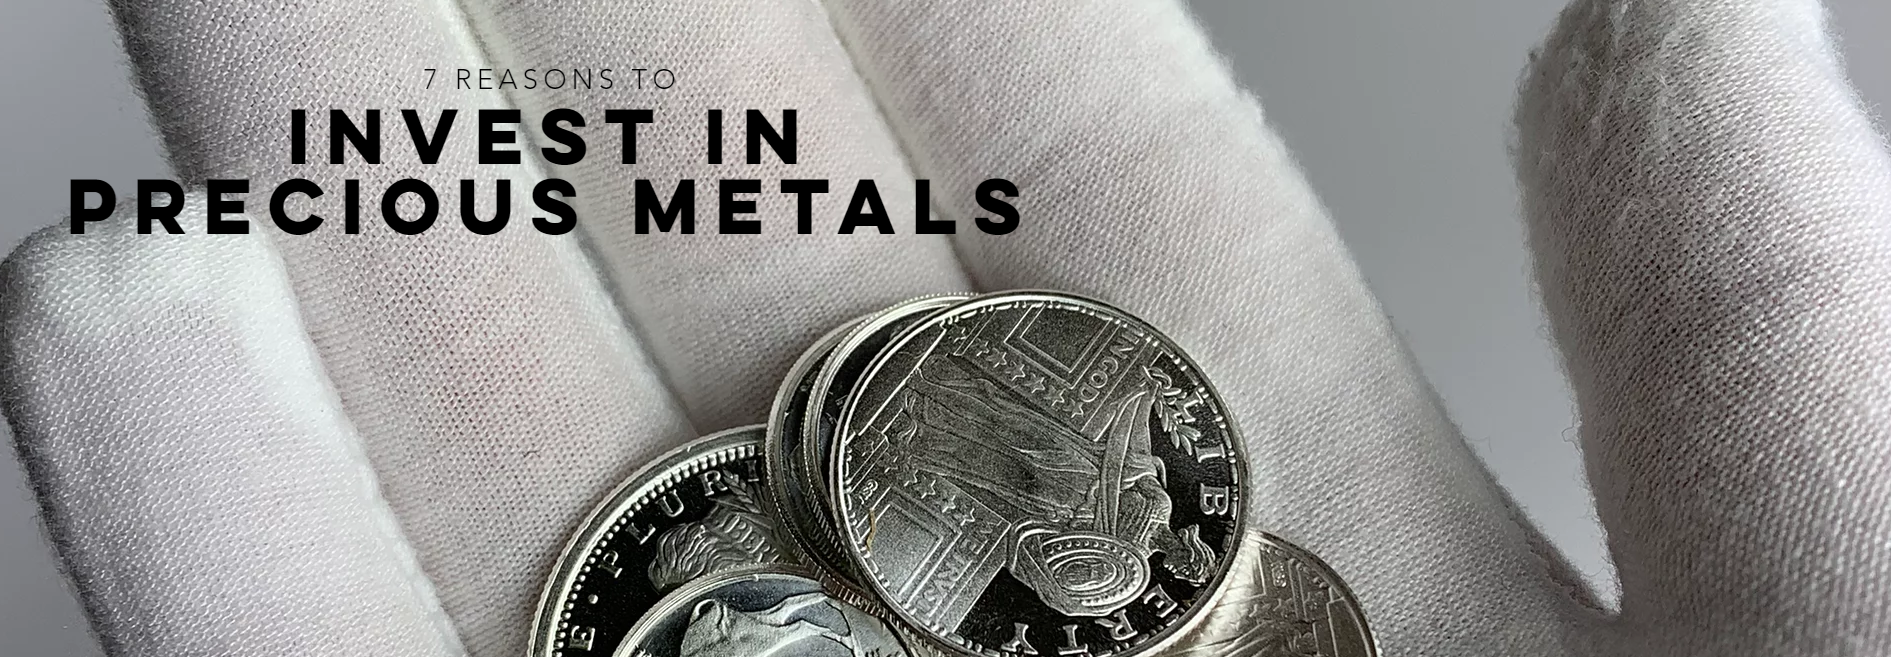 7 Reasons to Invest in Precious Metals